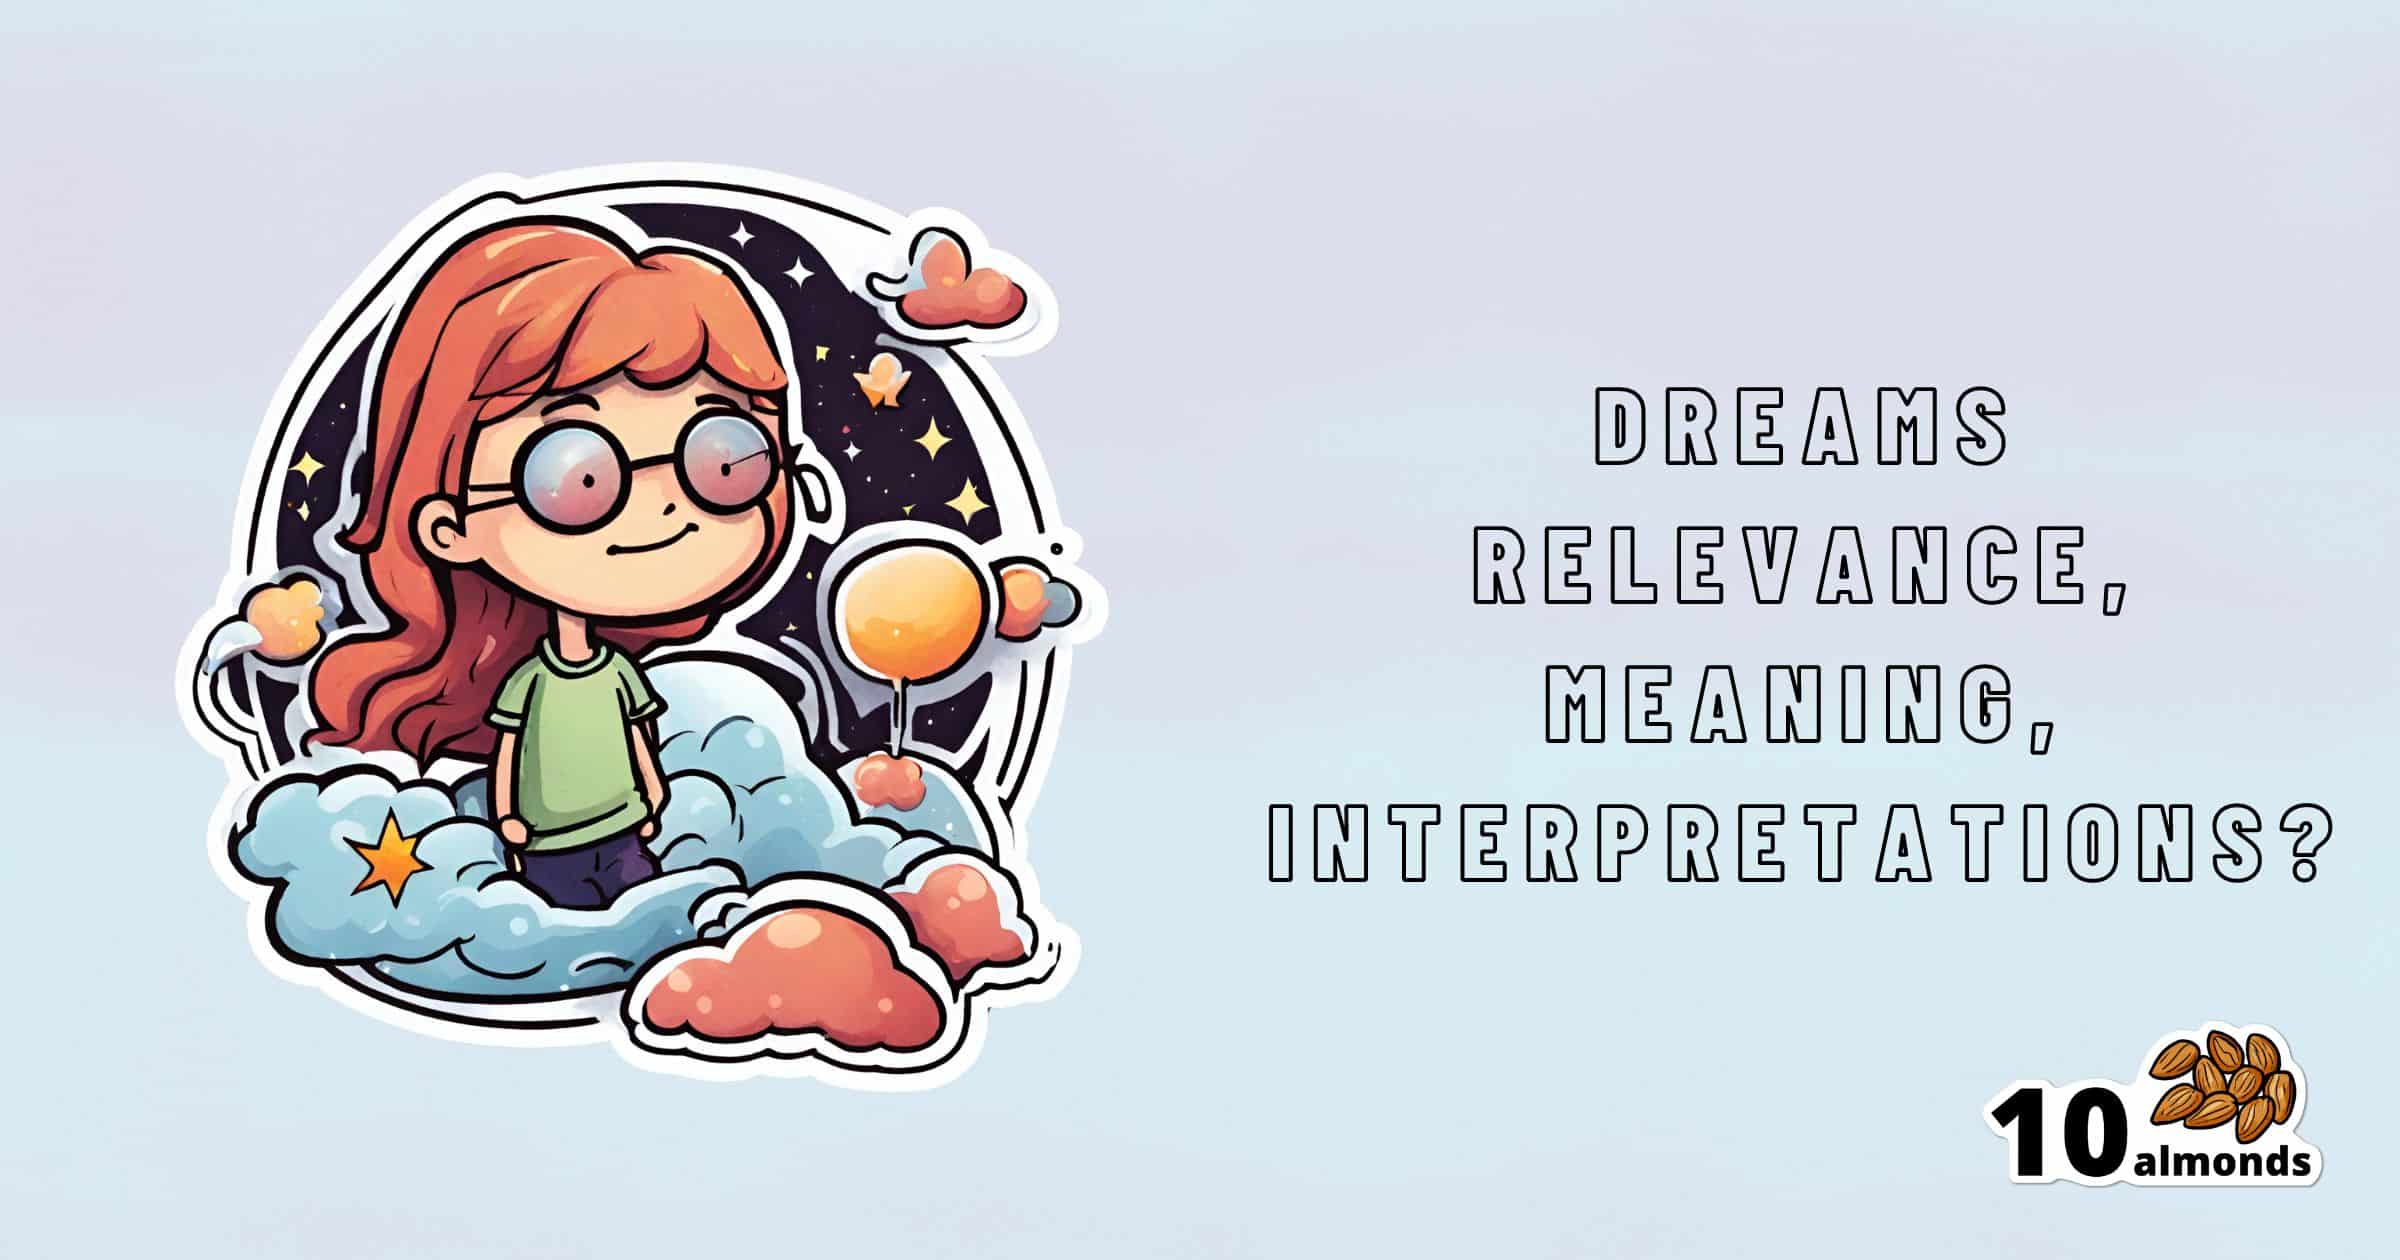 Illustration of a red-haired child wearing glasses, sitting on fluffy clouds with stars and a crescent moon in the background. Text to the right reads "Dreams: Relevance, Meanings, Interpretations?" The bottom right corner has a "10 almonds" logo.